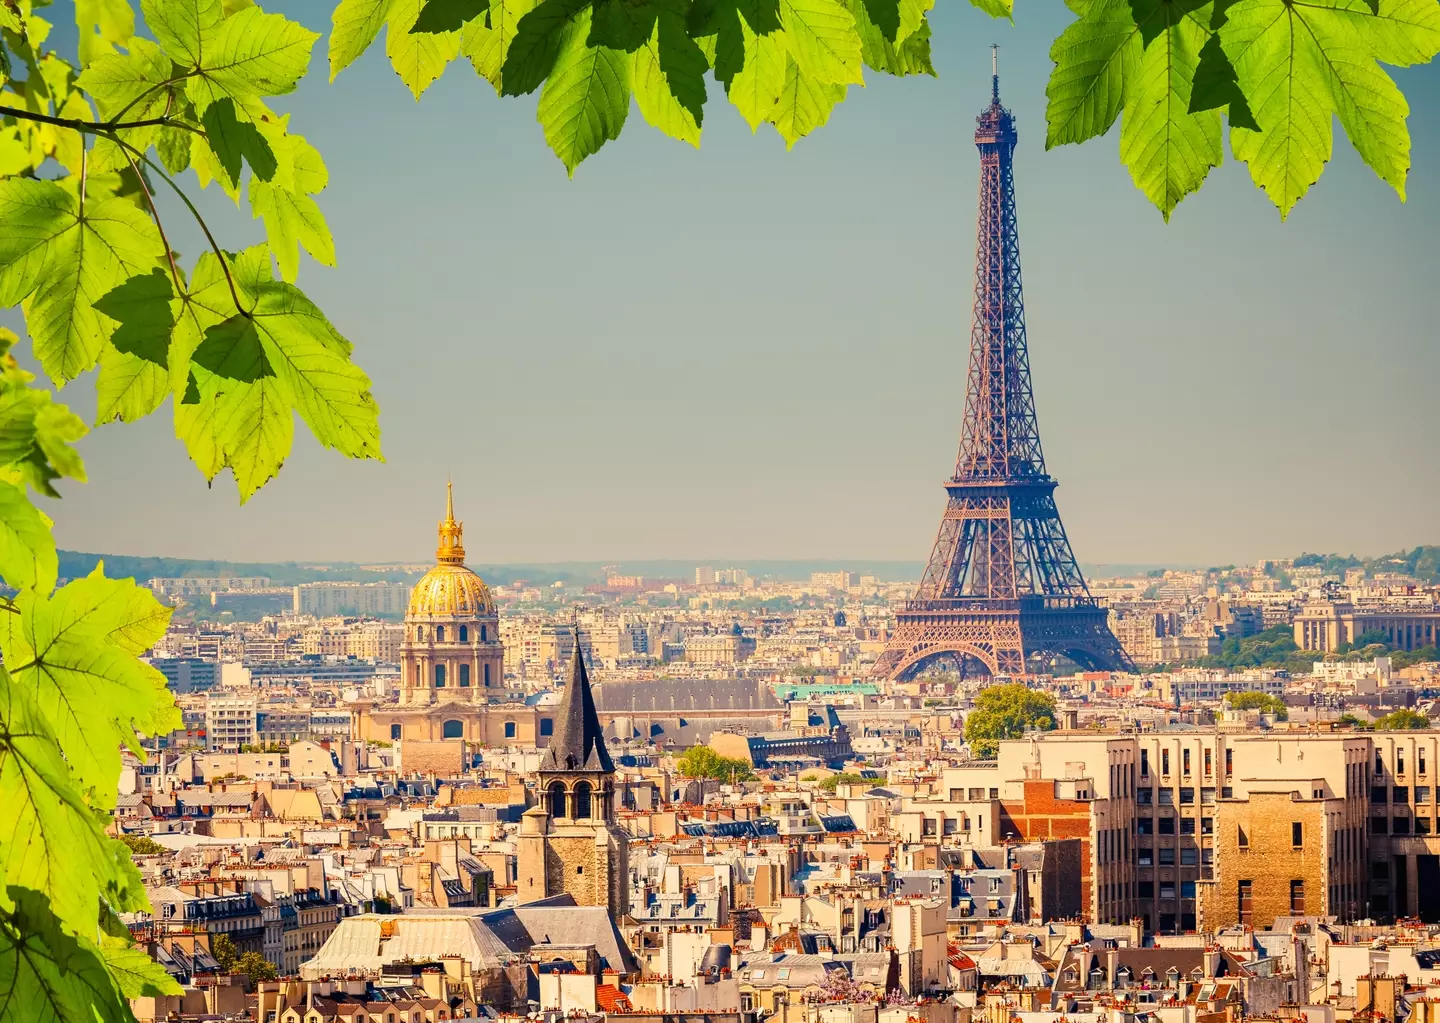 The Eiffel Tower has a belting history.